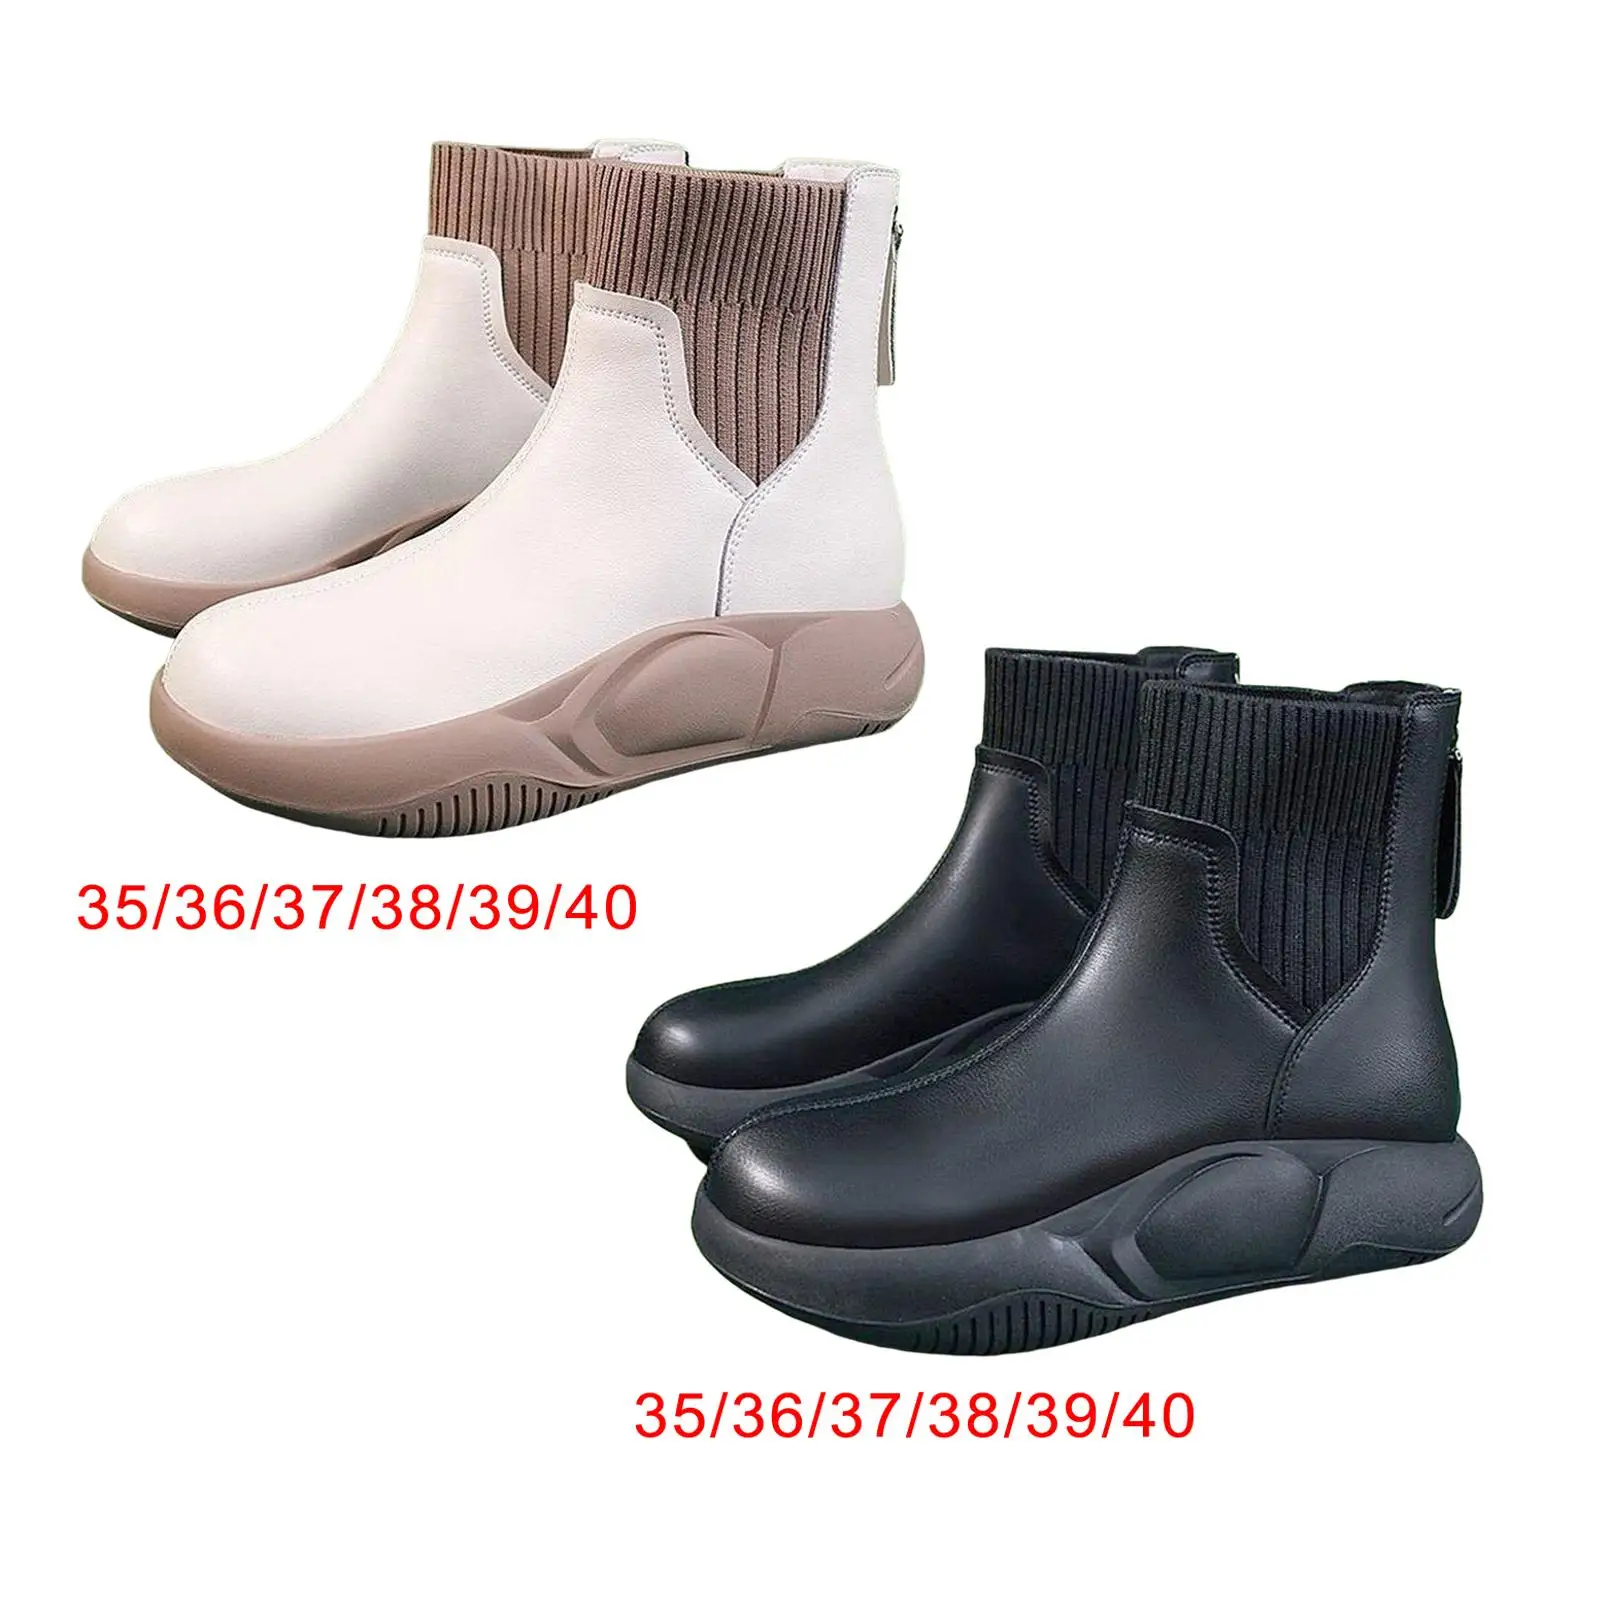 Women`s Winter Snow Boots Non Slip Thick Soled Waterproof Autumn Shoes Warm Nude Boots for Walking Climbing Fishing Ladies